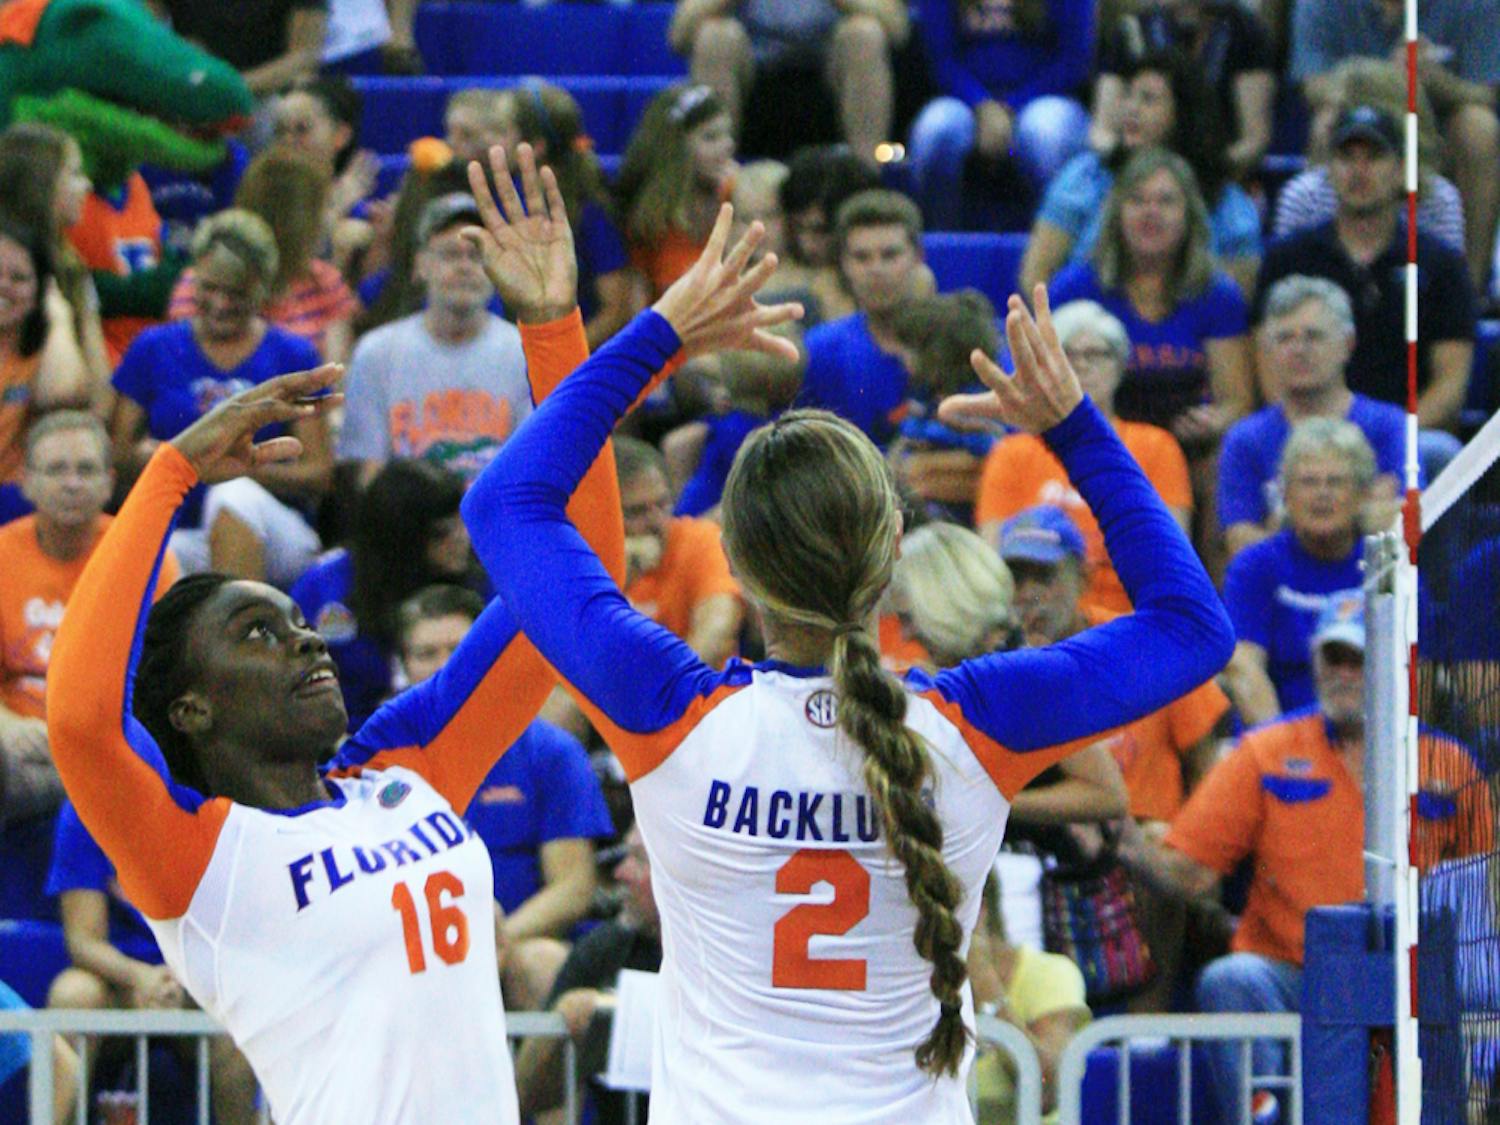 Simone Antwi (16) receives a pass from Dana Backlund (2) during UF’s 3-0 win against Jacksonville on Sept. 7, 2012, in the Stephen C. O'Connell Center. 